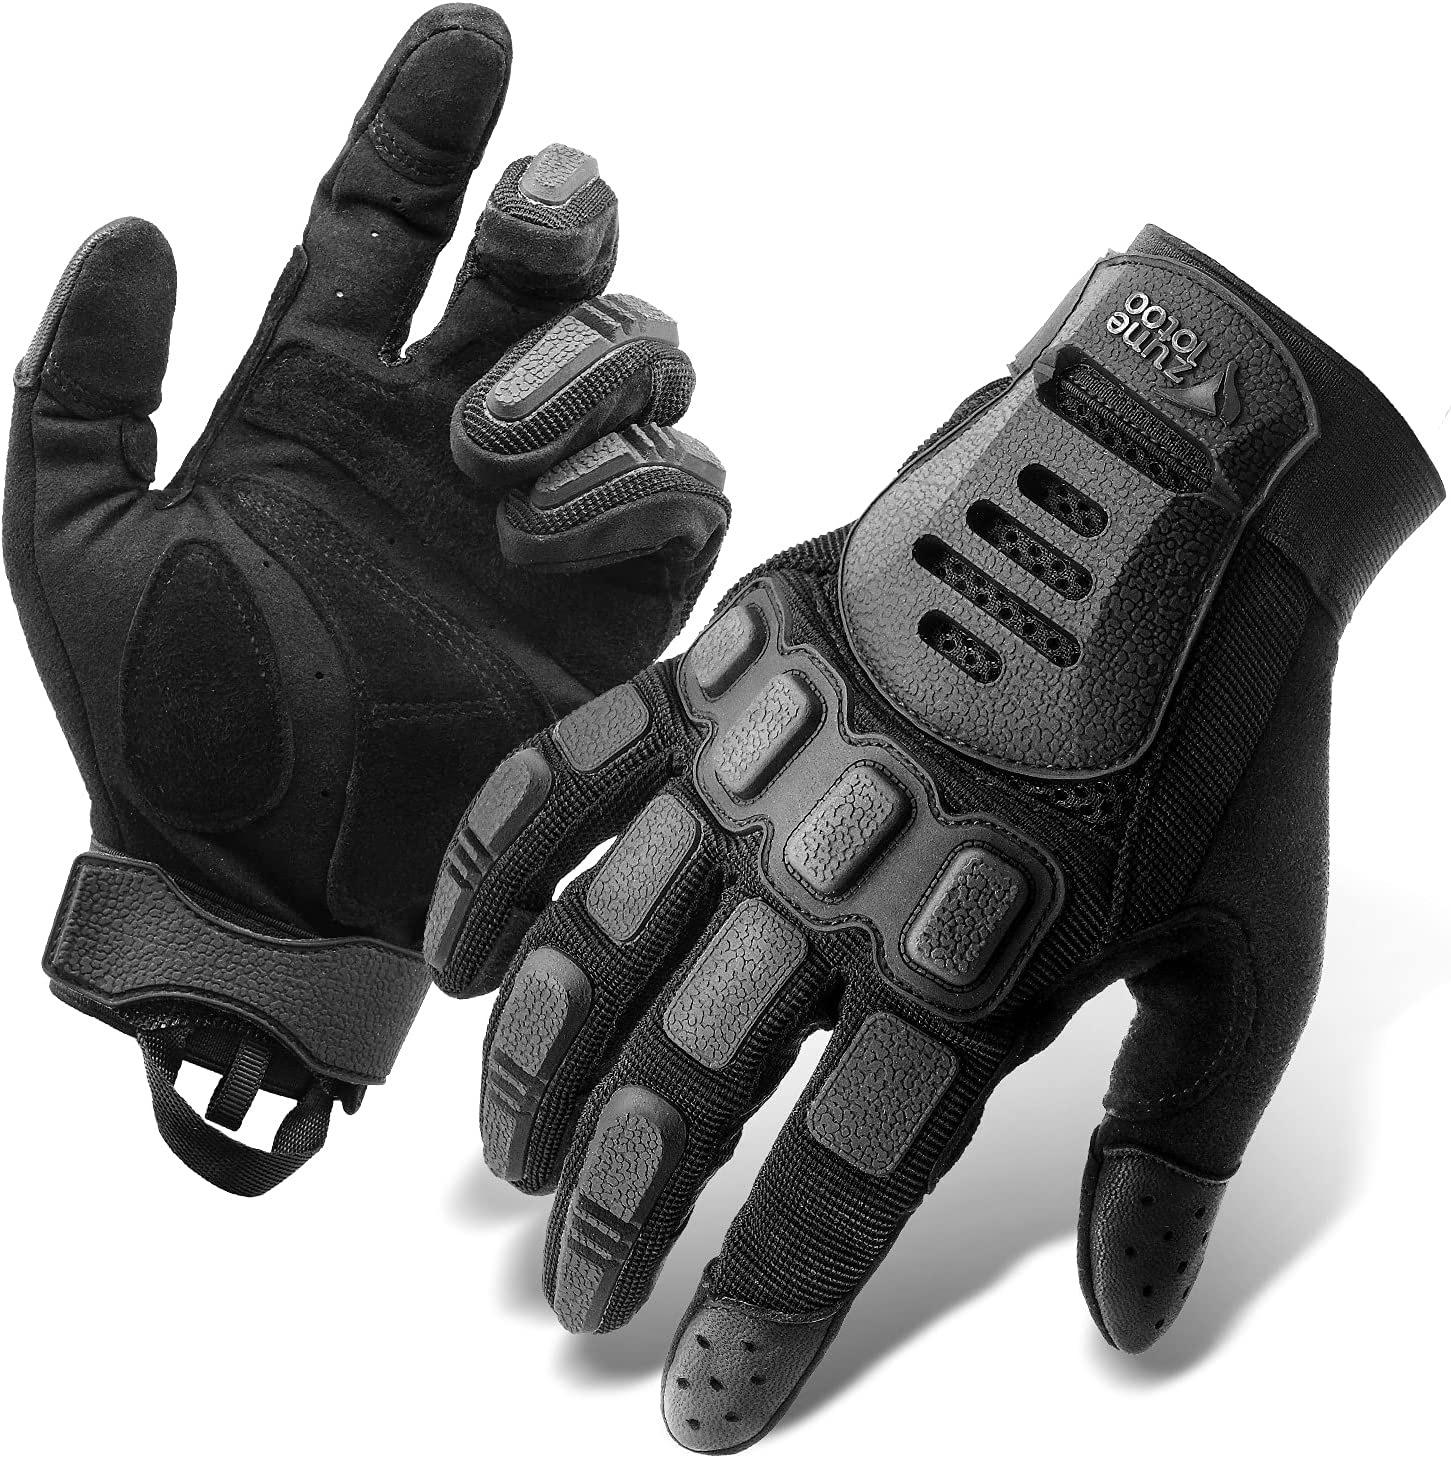 GRAMFIRE Tactical Gloves Safety Waterproof Military Gear Airsoft Gloves